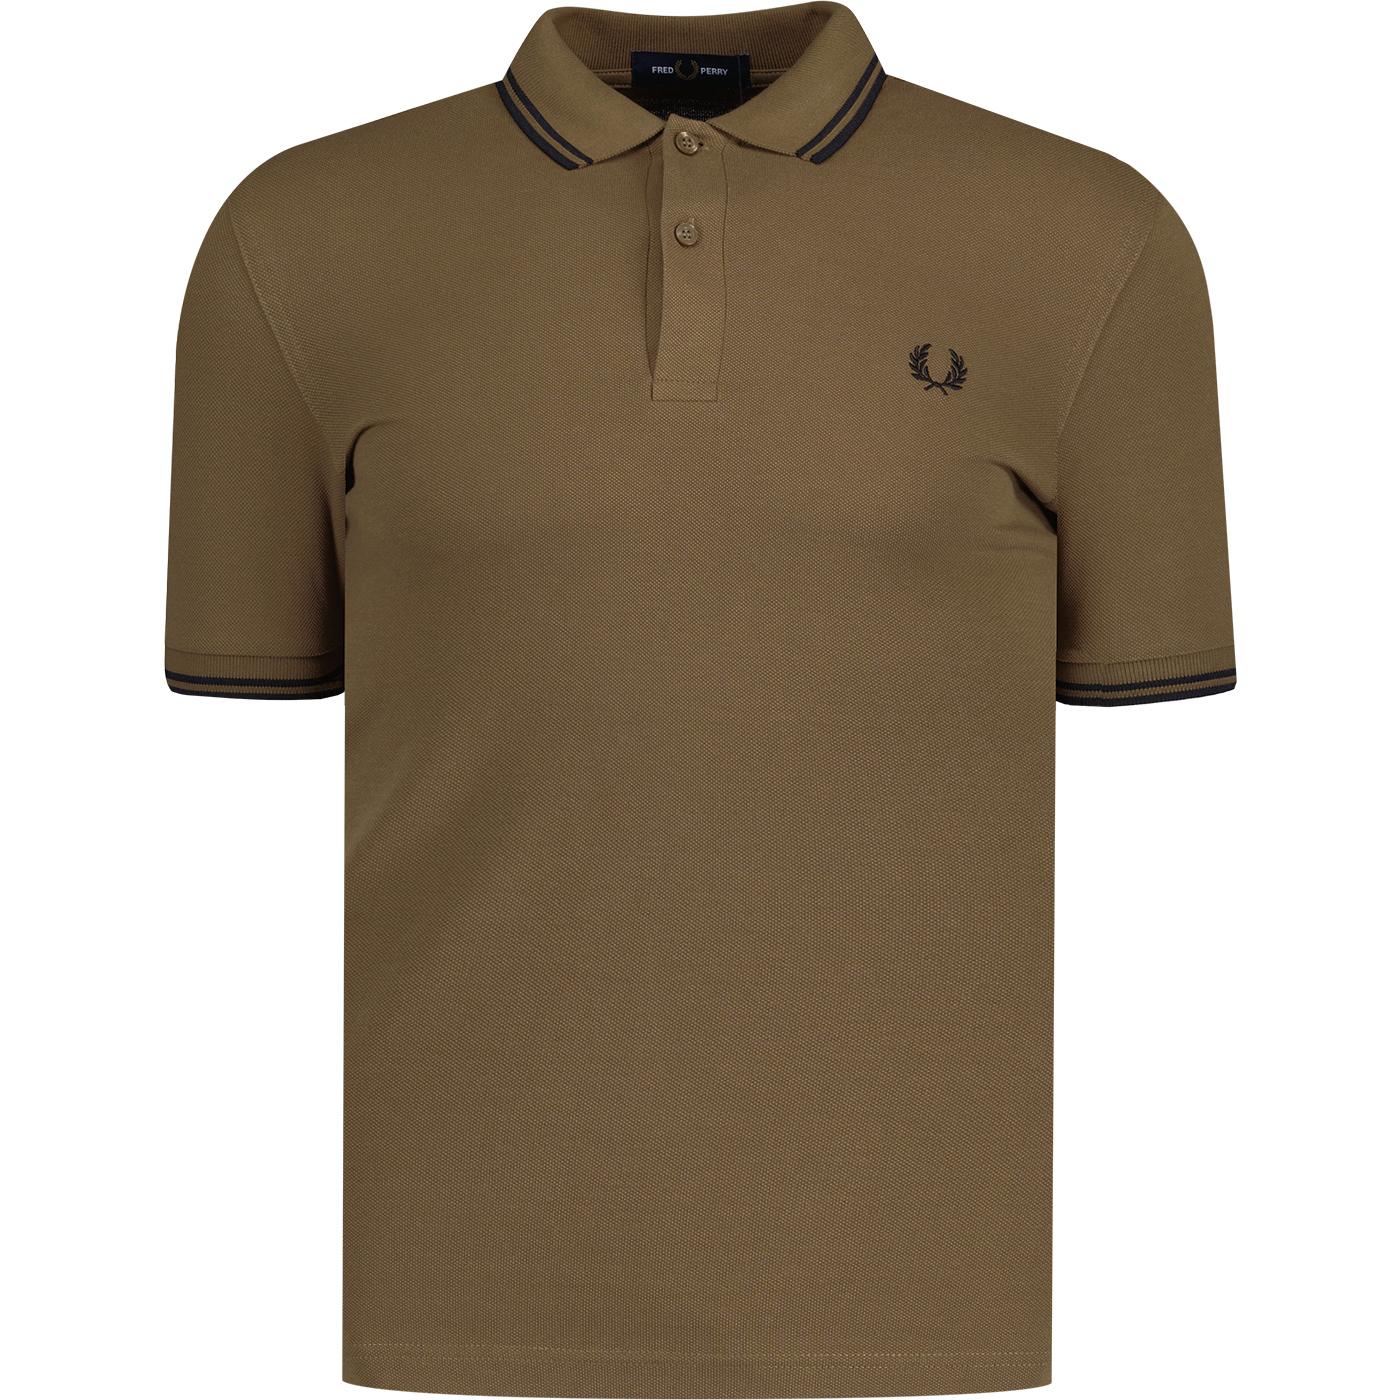 Fred Perry M3600 Mod Twin Tipped Polo Shirt Stone